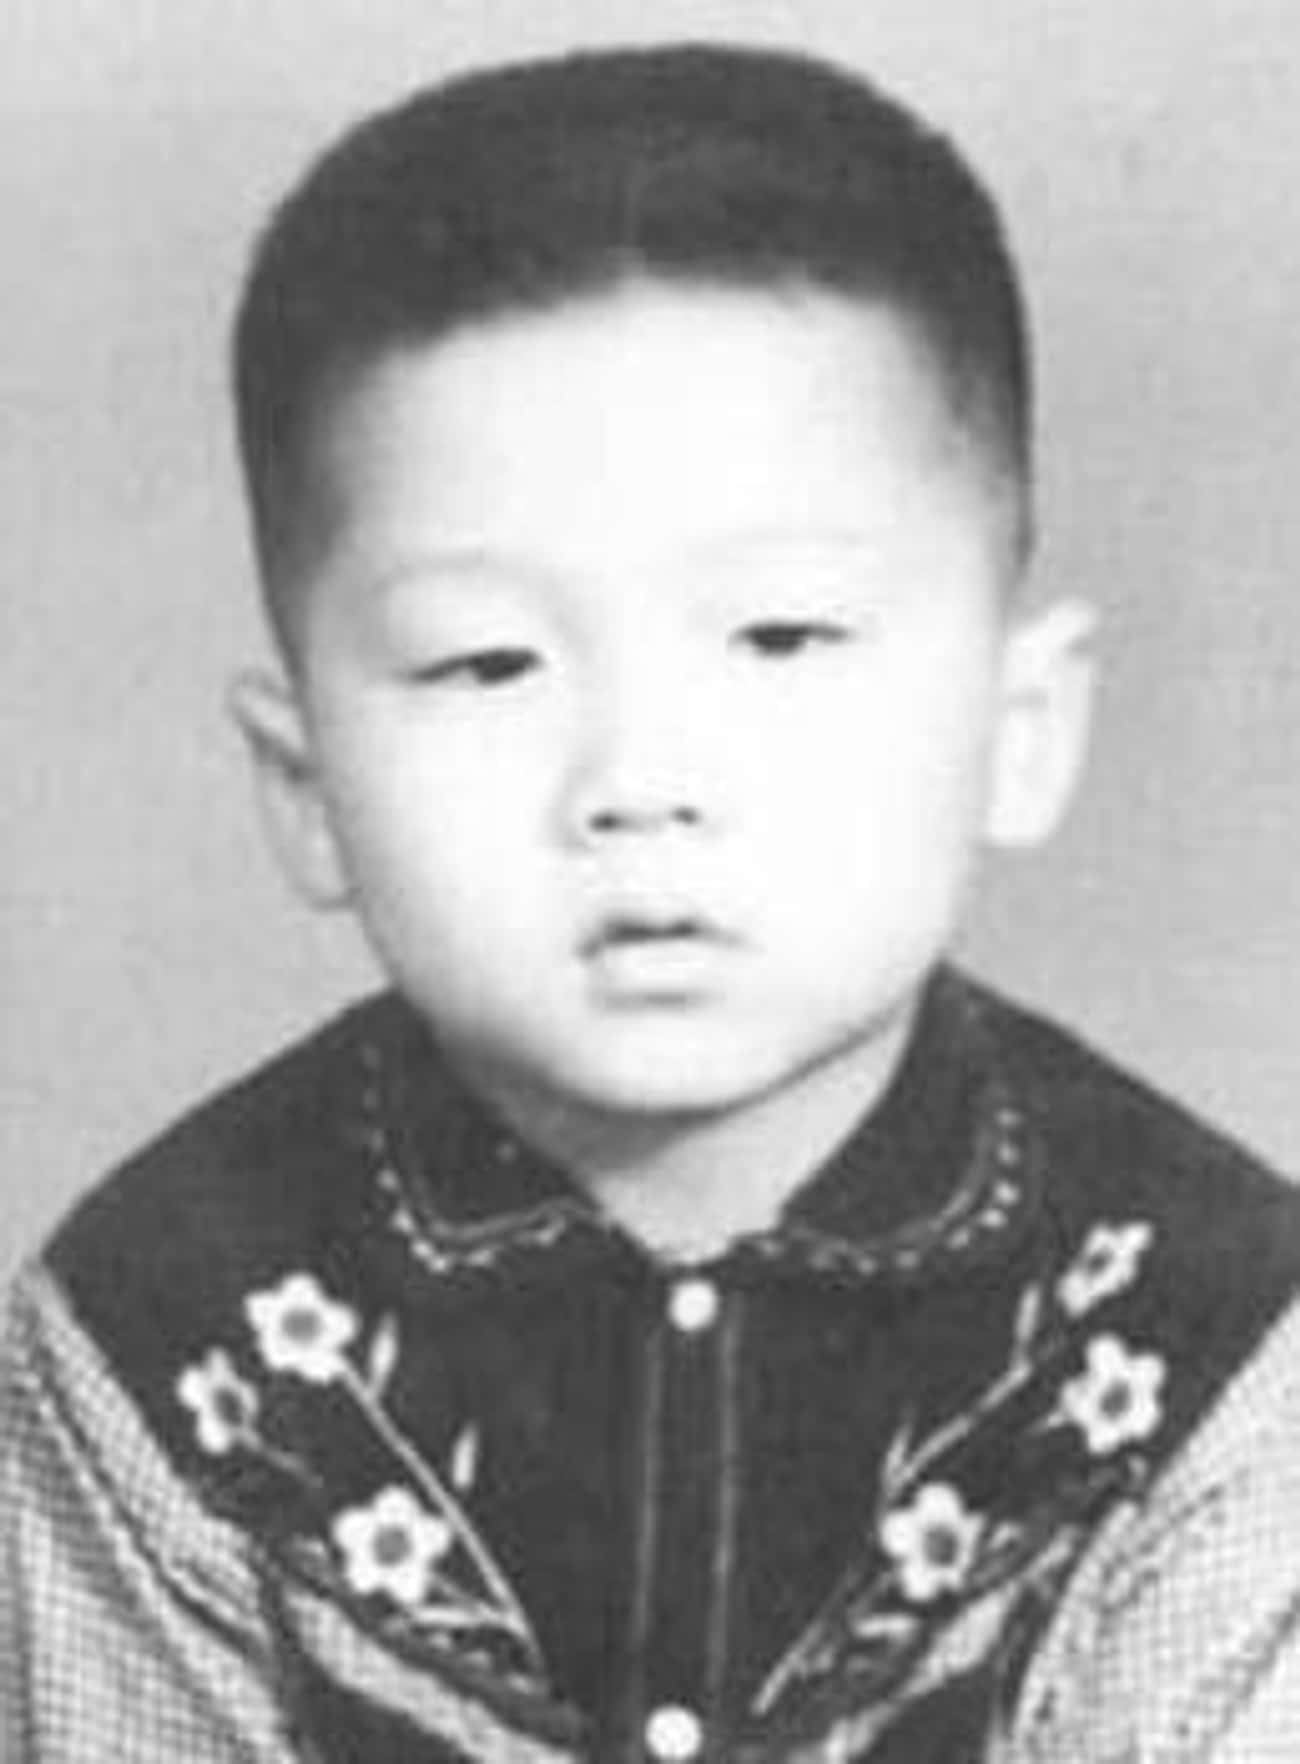 Young Jackie Chan as a Toddler